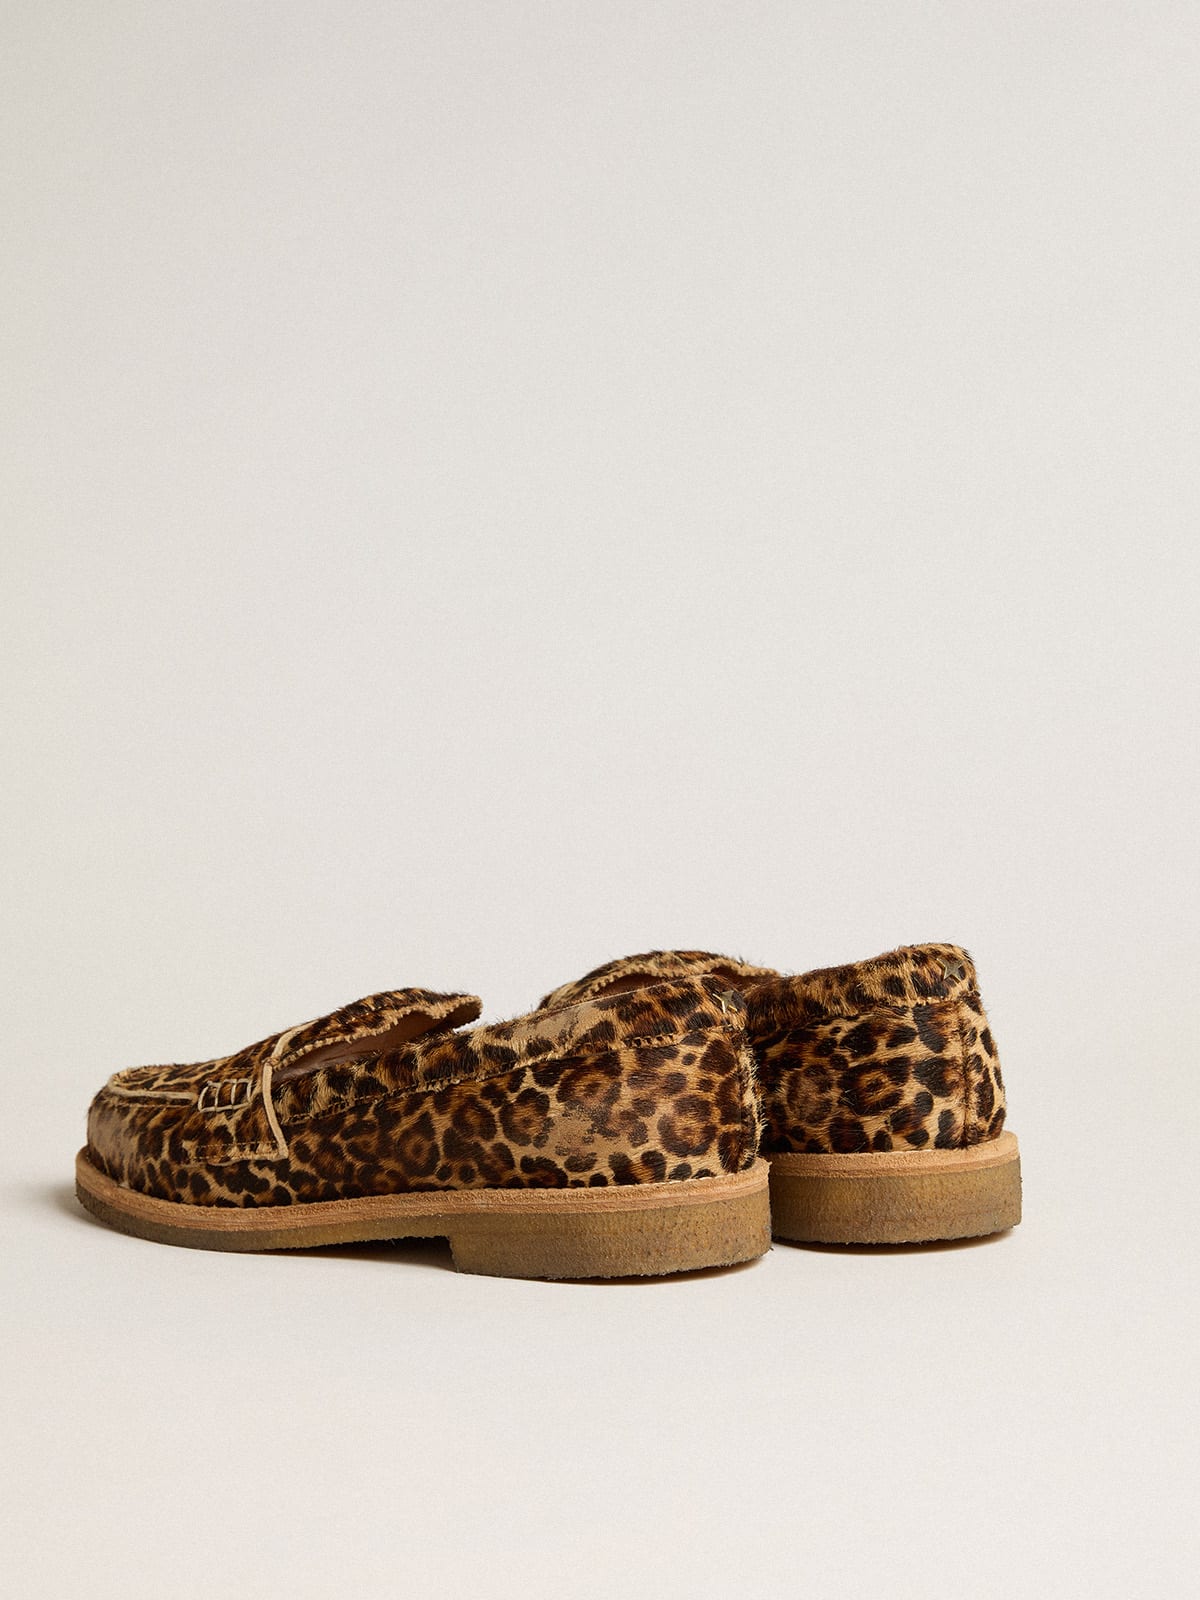 Lucky brand Leopard Loafers Size 8M for Sale in Montclair, CA